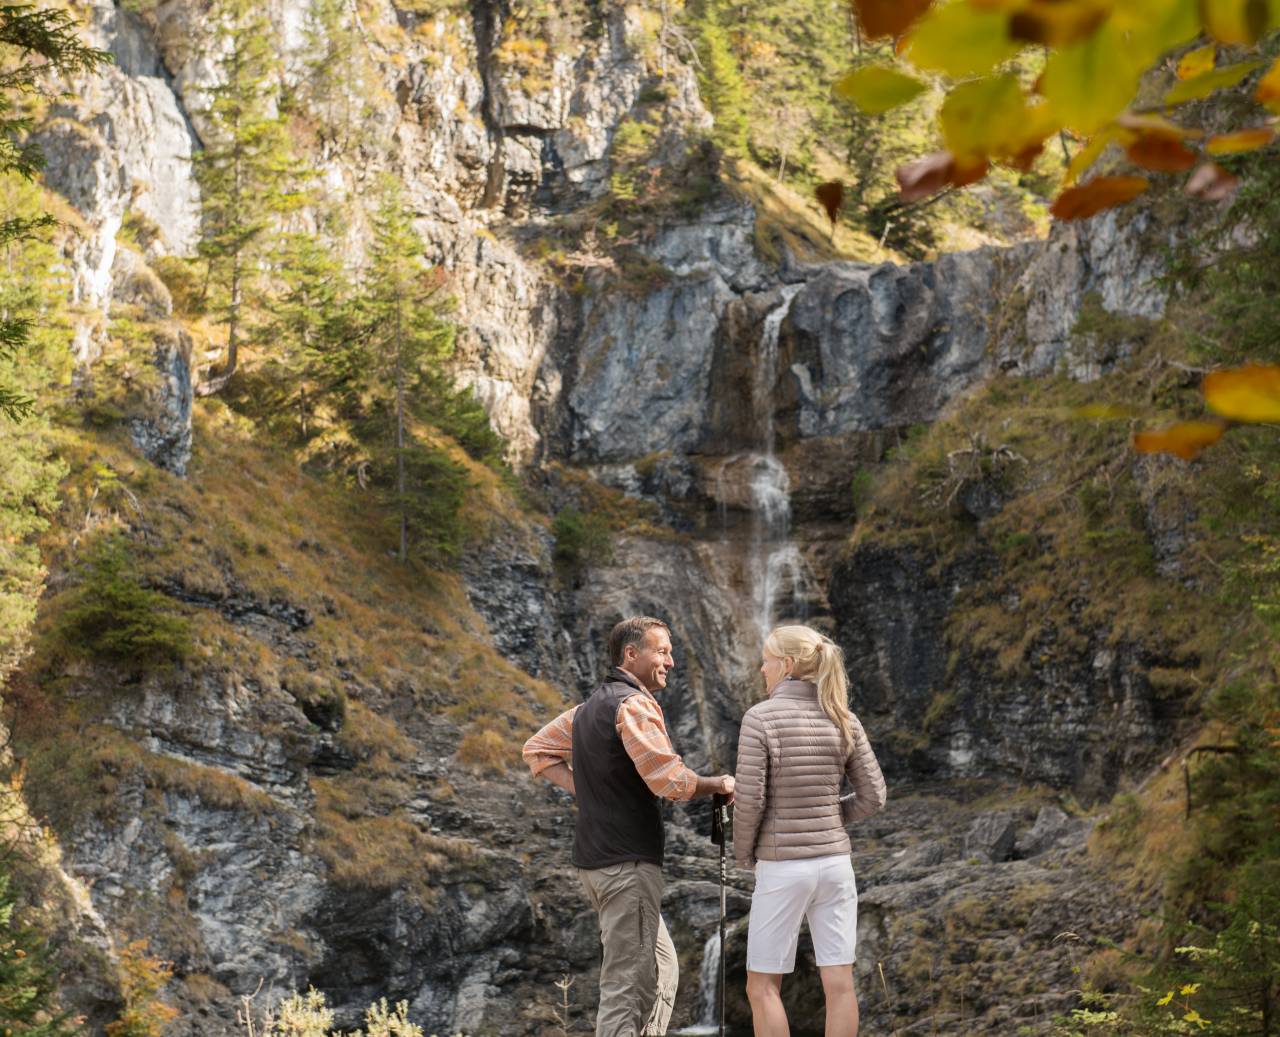 Man and woman in front of a small waterfall in the mountains while hiking in autumn